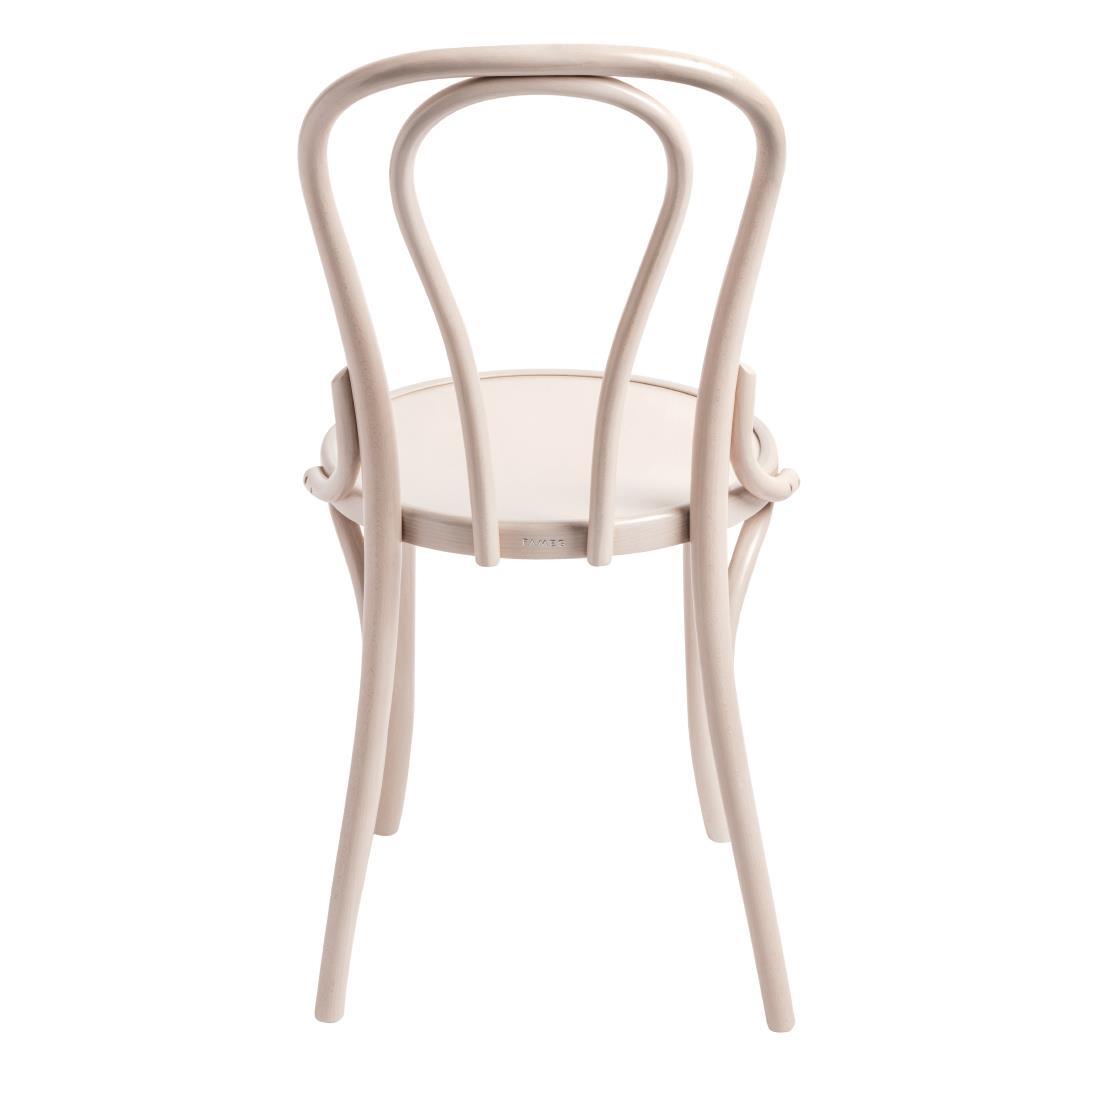 Fameg Bentwood Bistro Side Chairs Whitewash (Pack of 2) - GF968  - 3